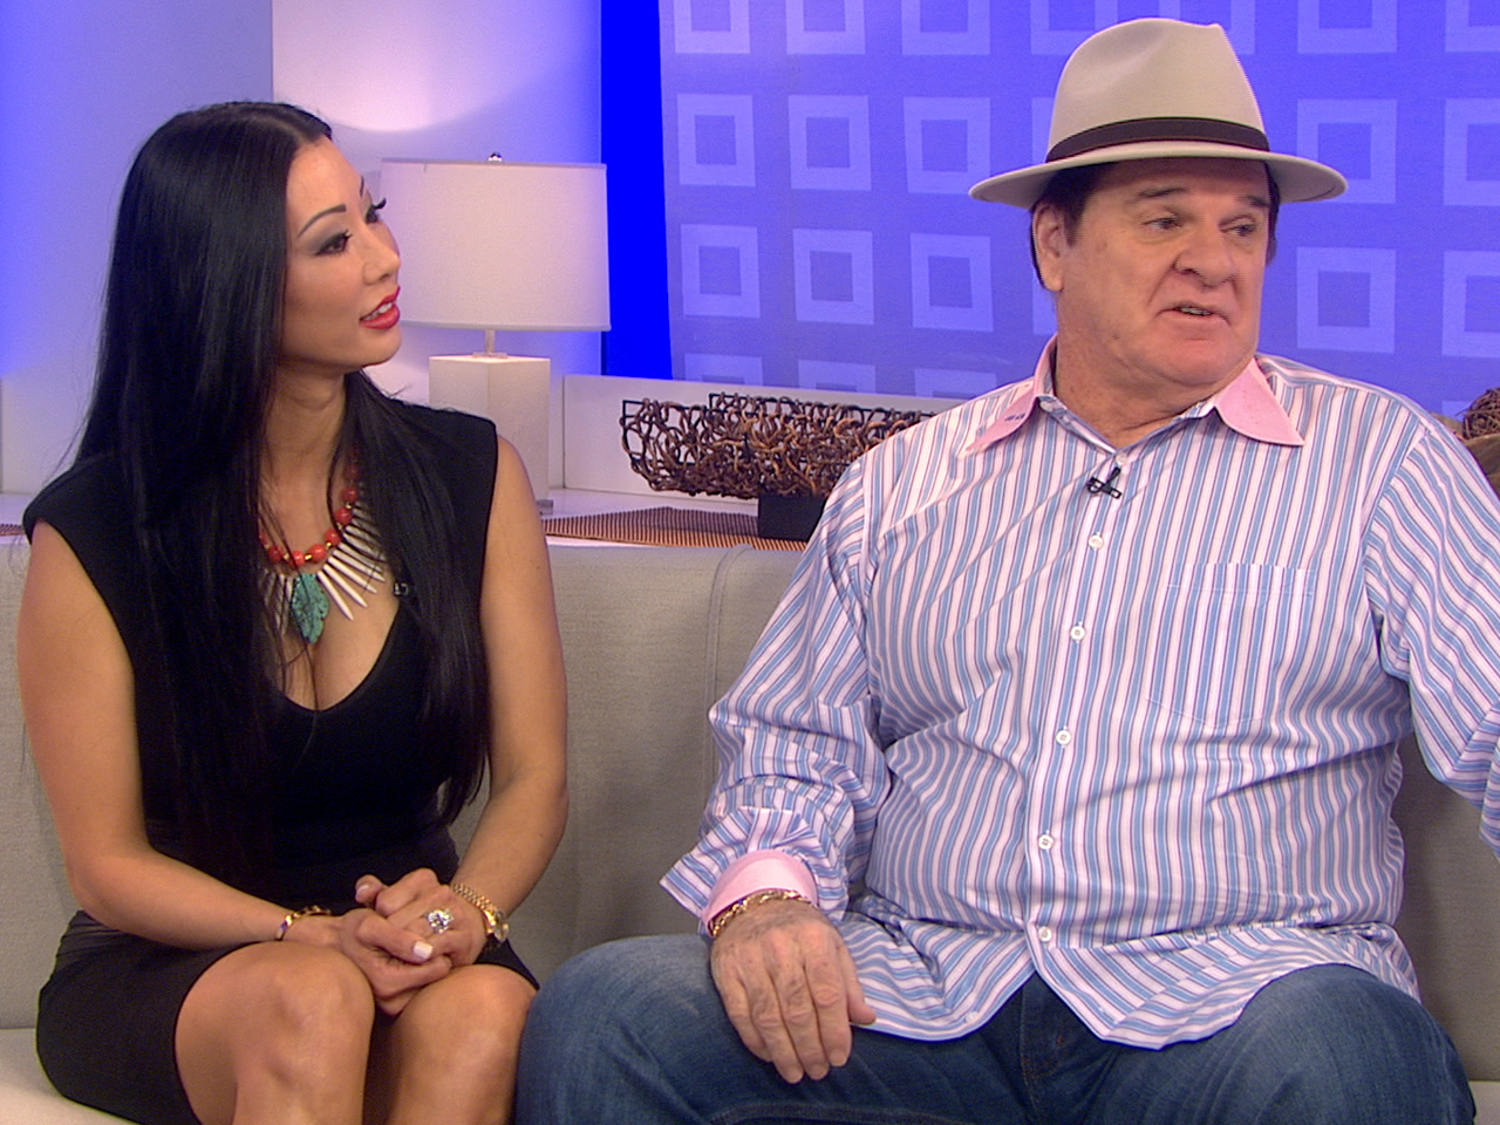 Pete Rose: Hits and Mrs.: Season 1, Episode 1 - Rotten Tomatoes